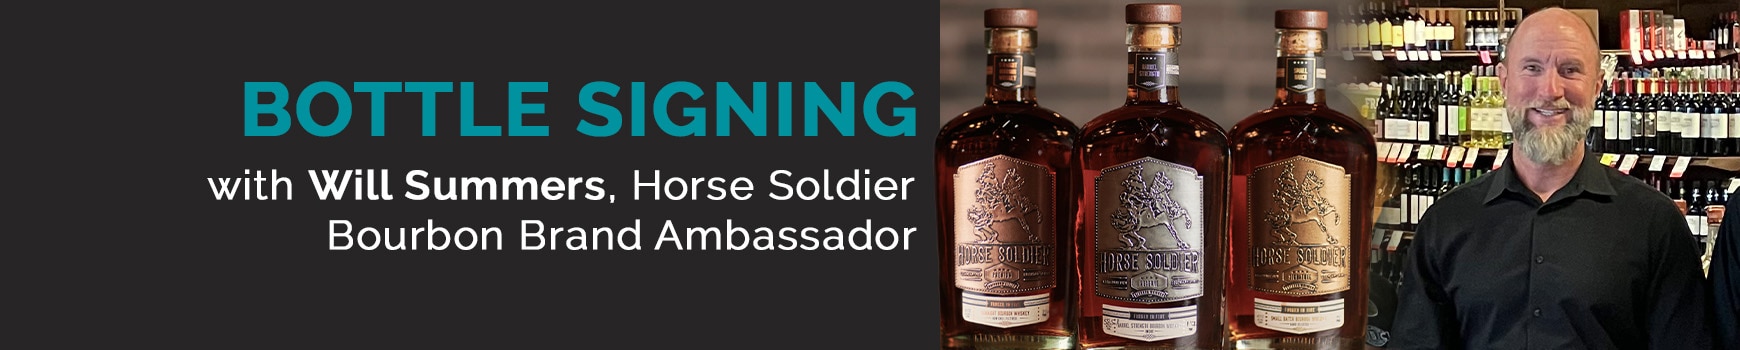 Bottle Signing with Will Summers, Horse Soldier Bourbon Brand Ambassador.